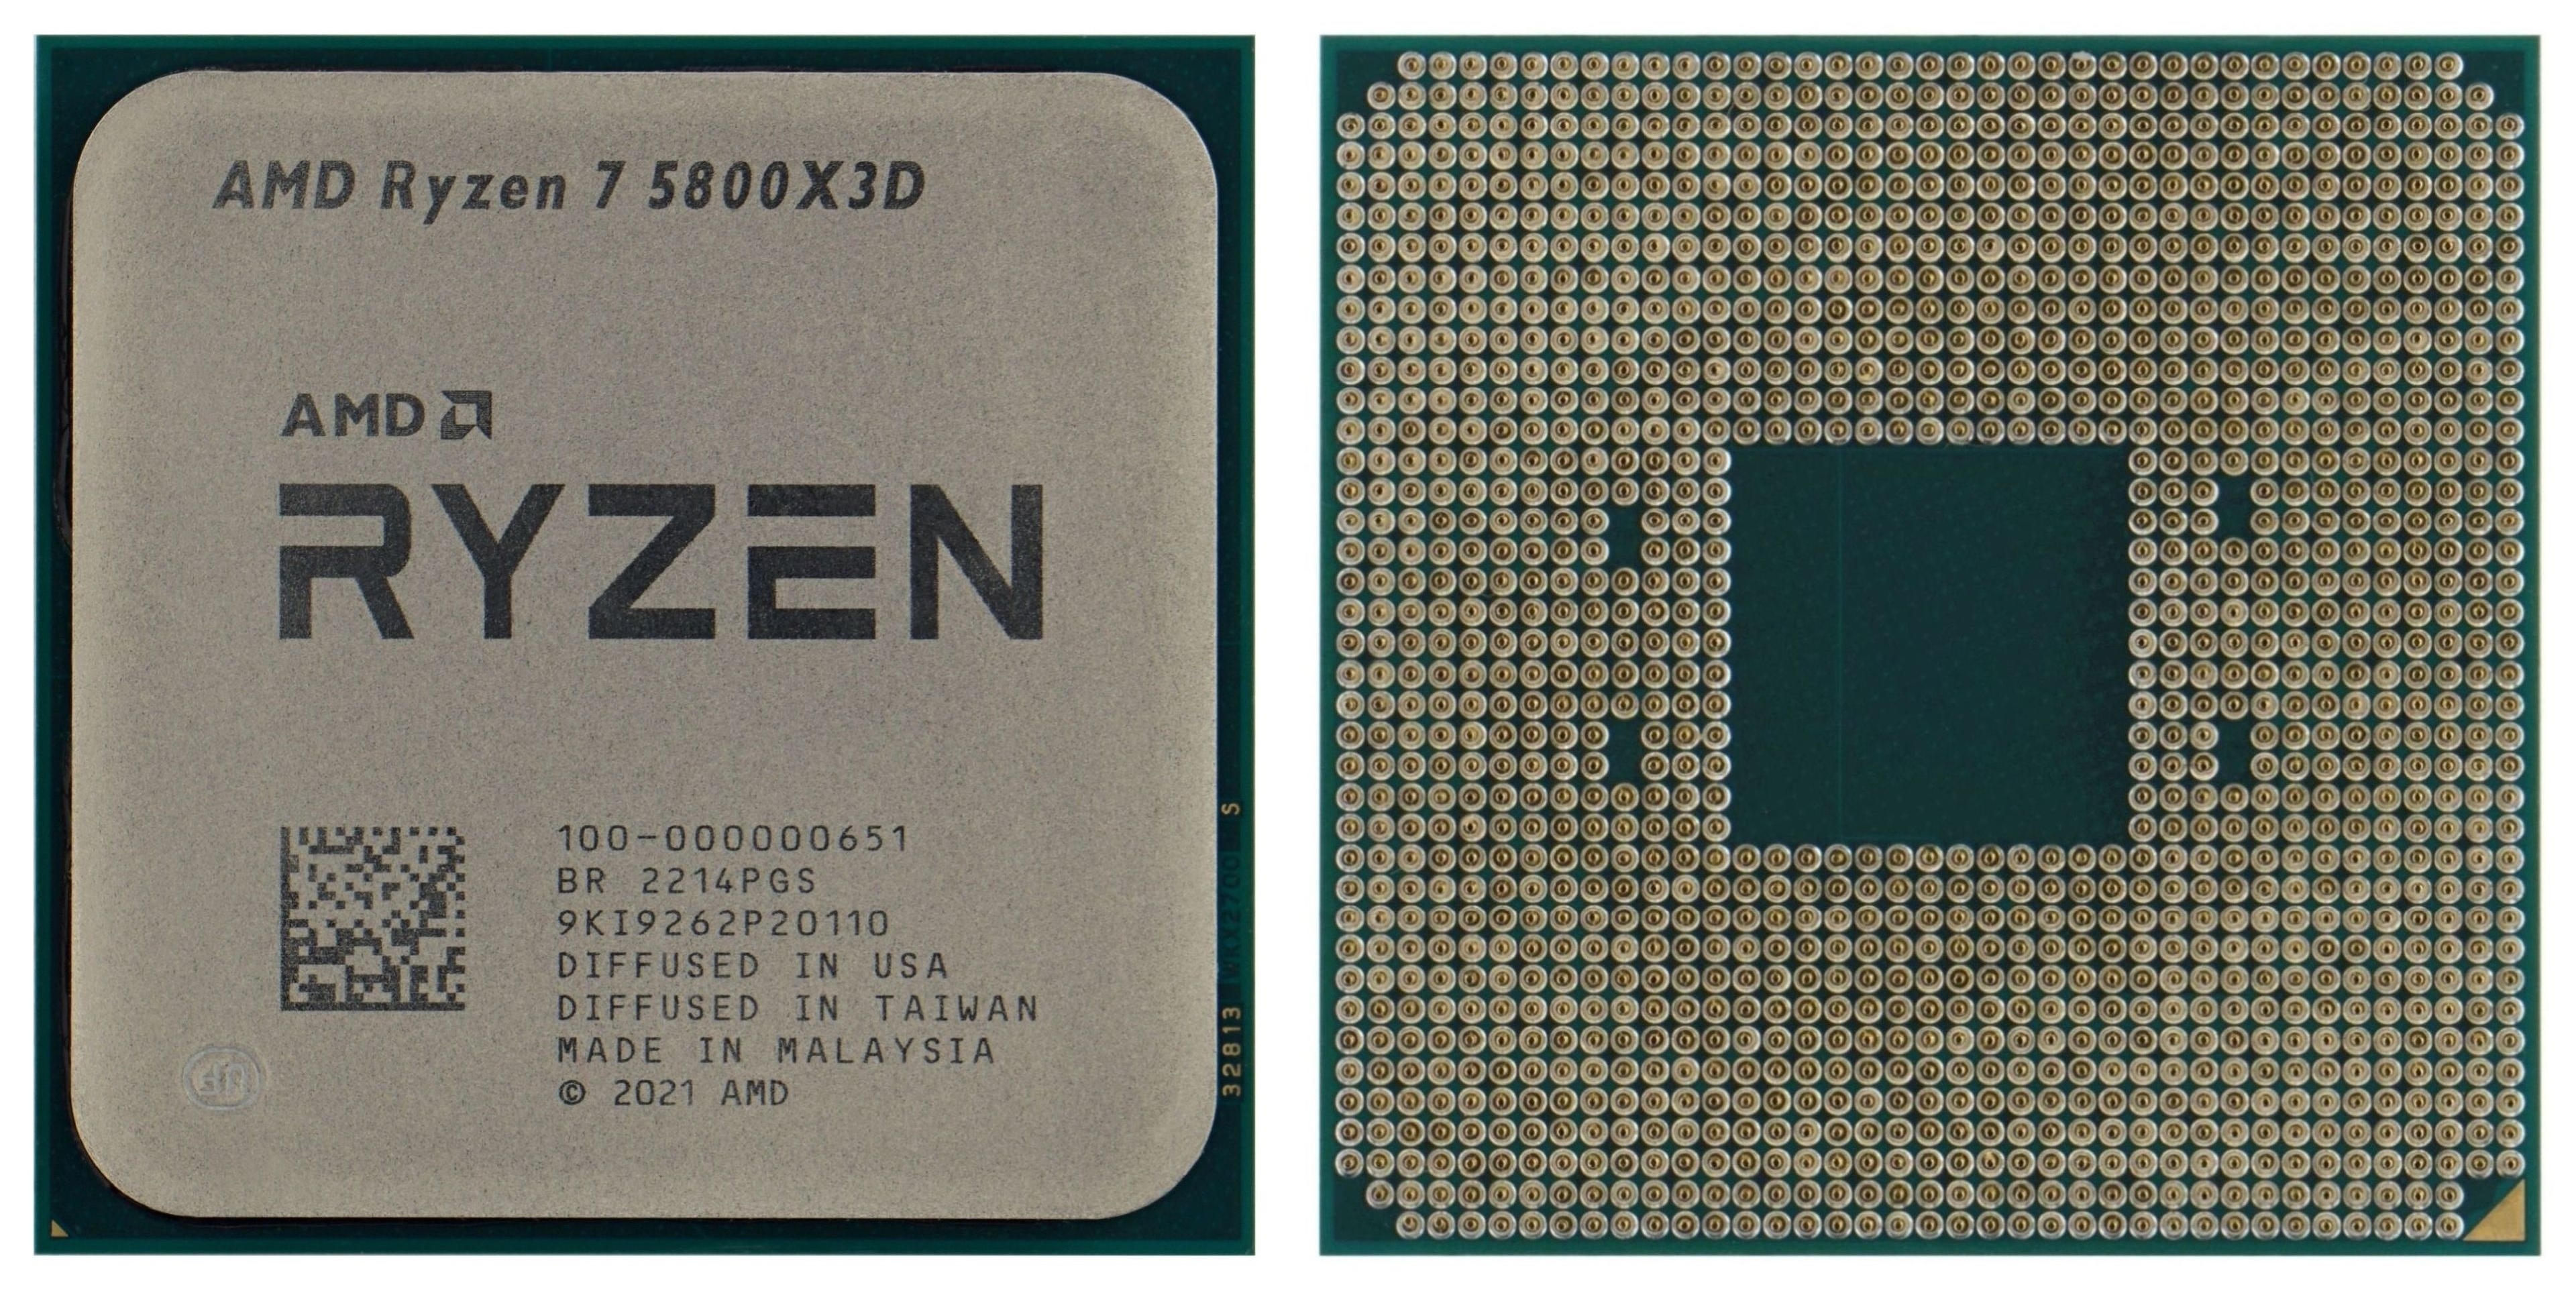 Testing the AMD Ryzen 7 5800X3D: not the best gaming CPU, but a